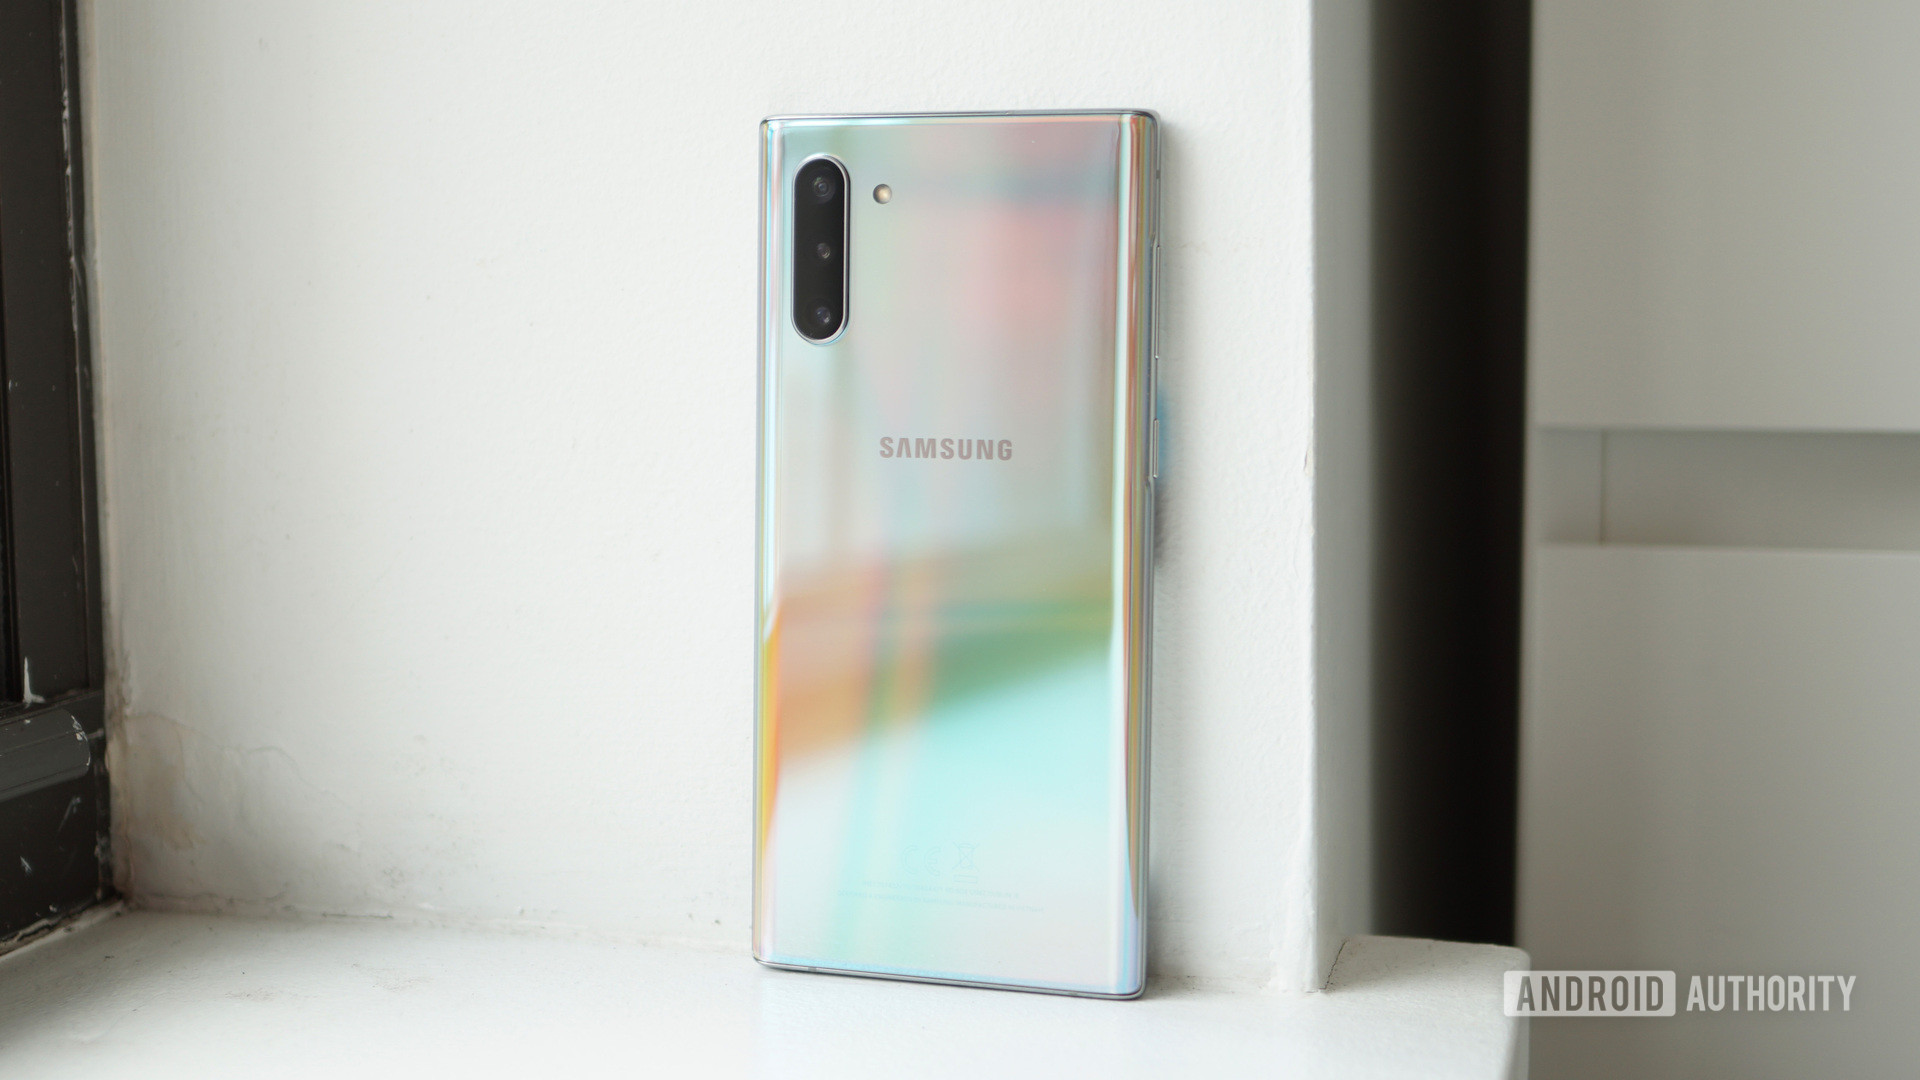 Got a Galaxy Note 10 series phone? Then the One UI 2.0 beta is available for you in some countries.